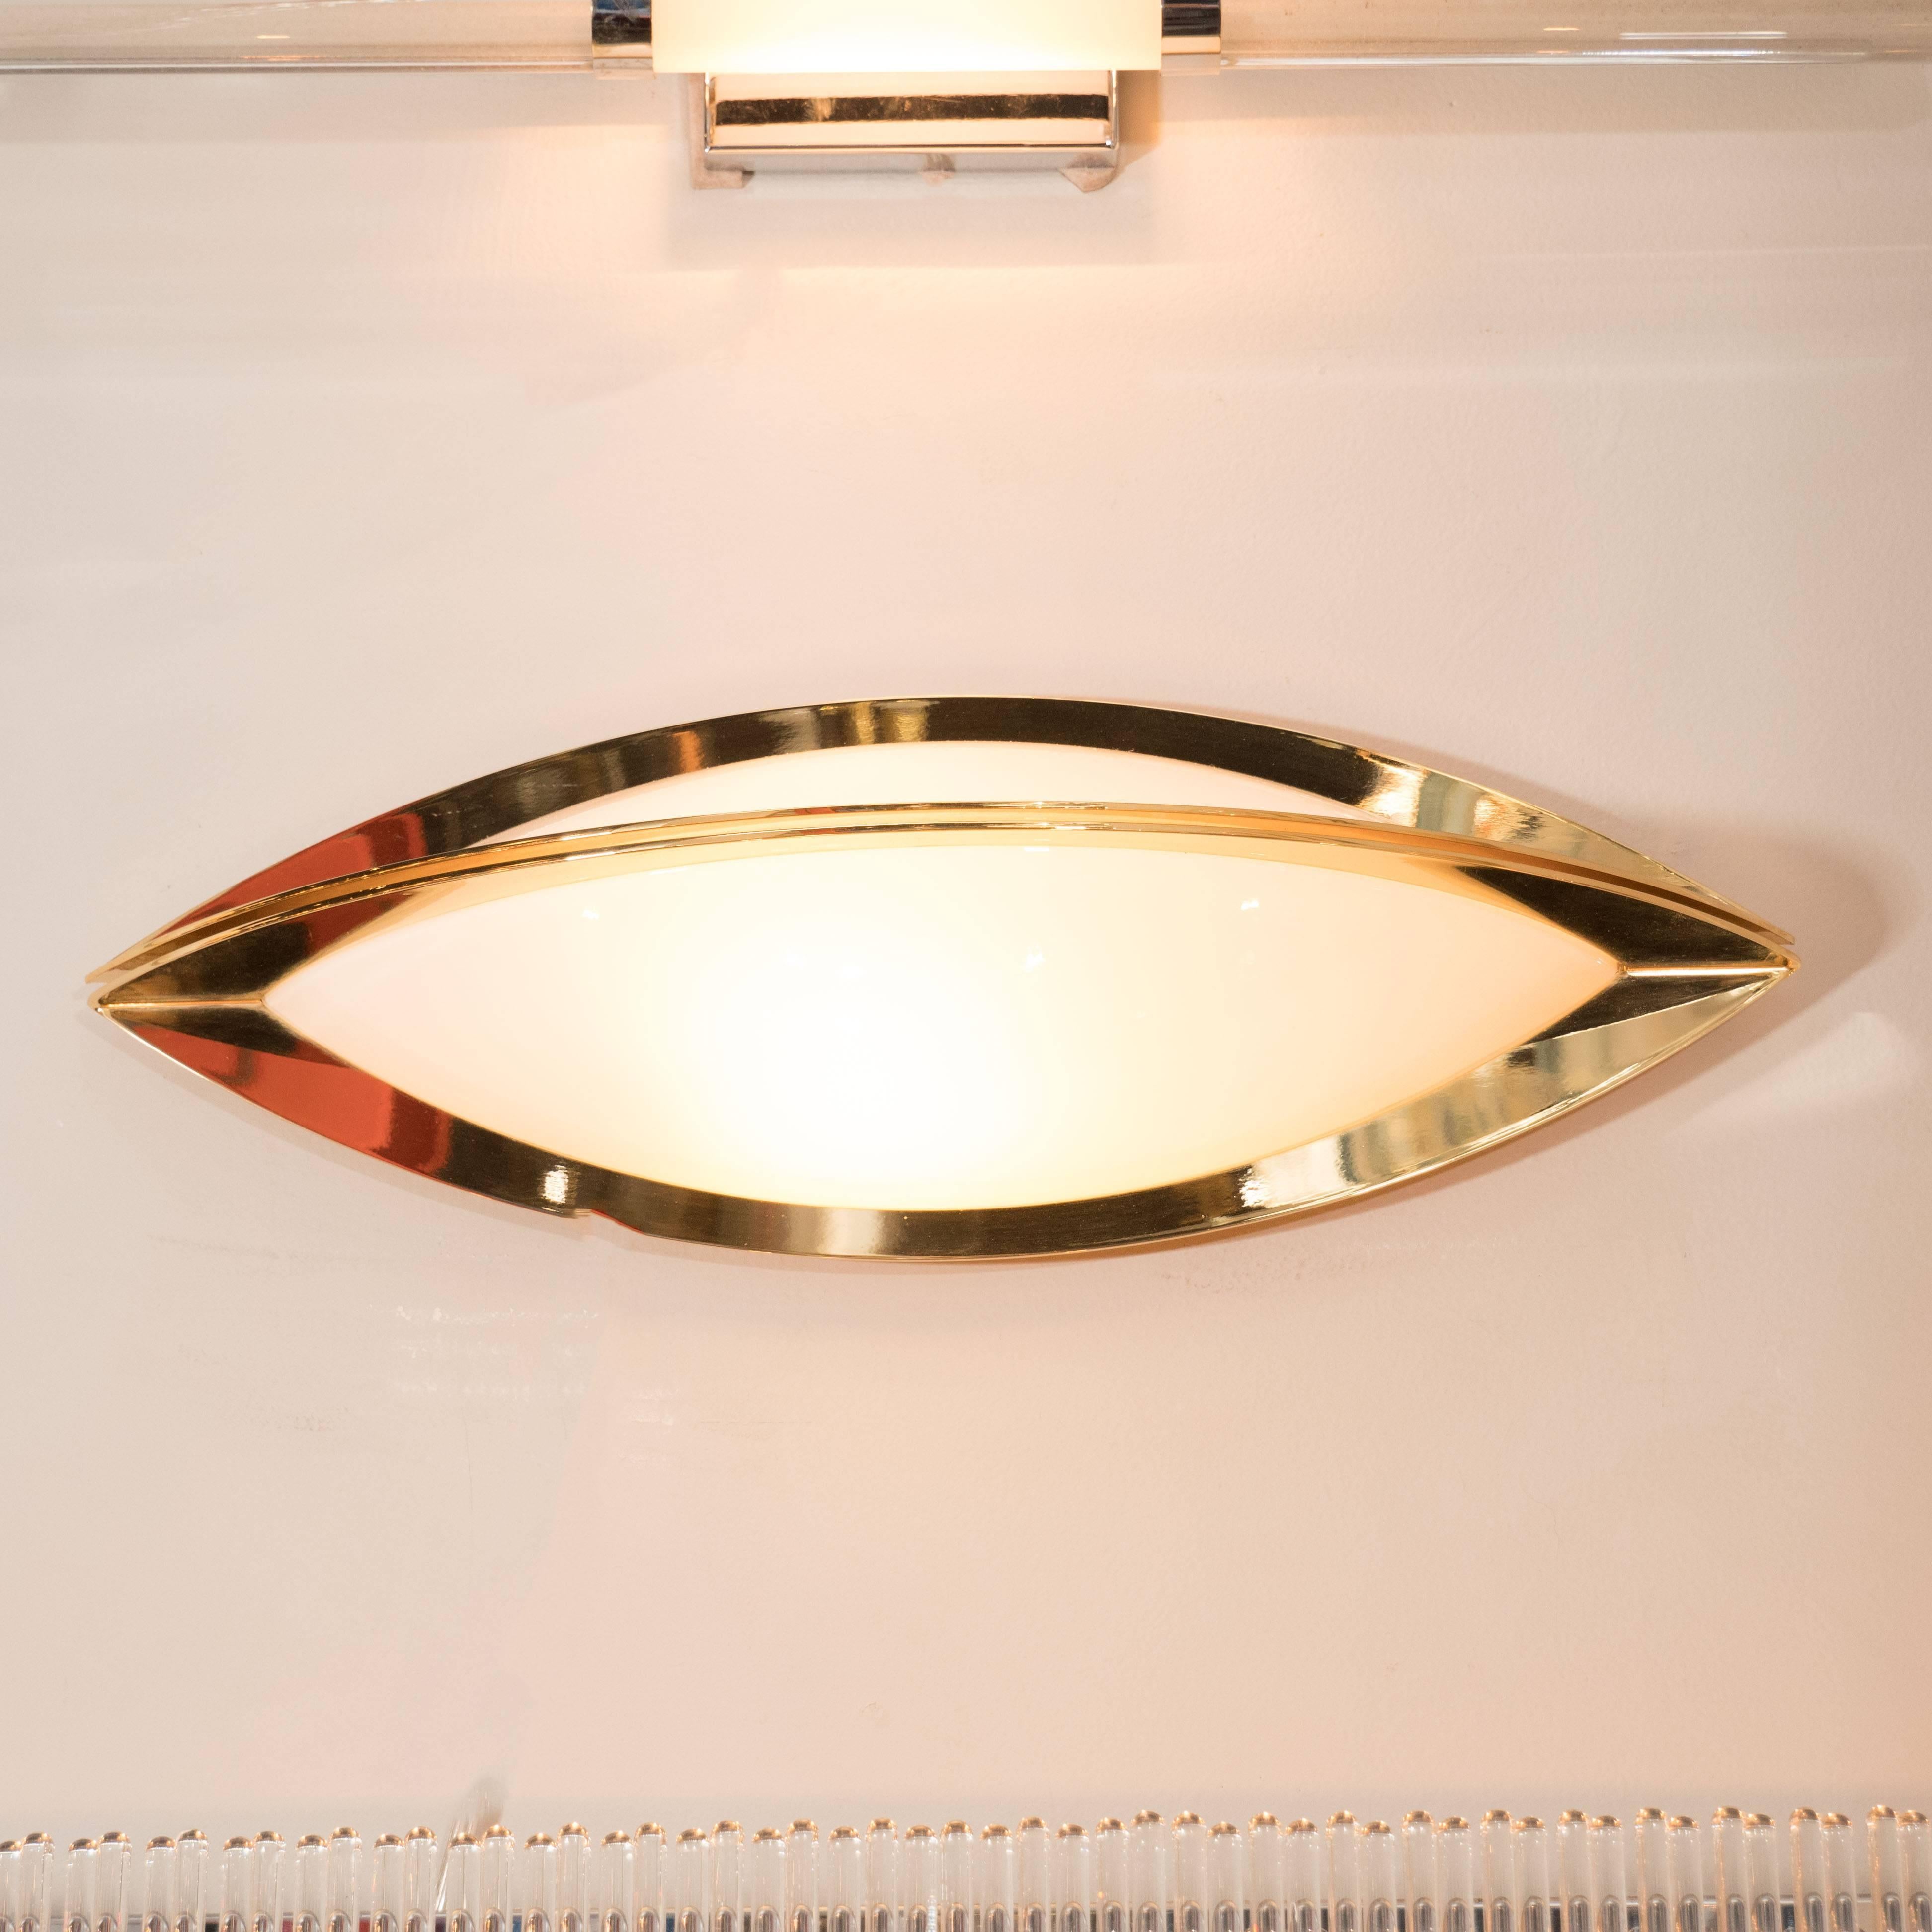 This sophisticated vanity sconce was realized by the esteemed German lighting studio Glashütte Limburg in Germany, circa 1960. It features an ovoid form consisting of two polished brass demilunes that meet culminate in the center, coming within